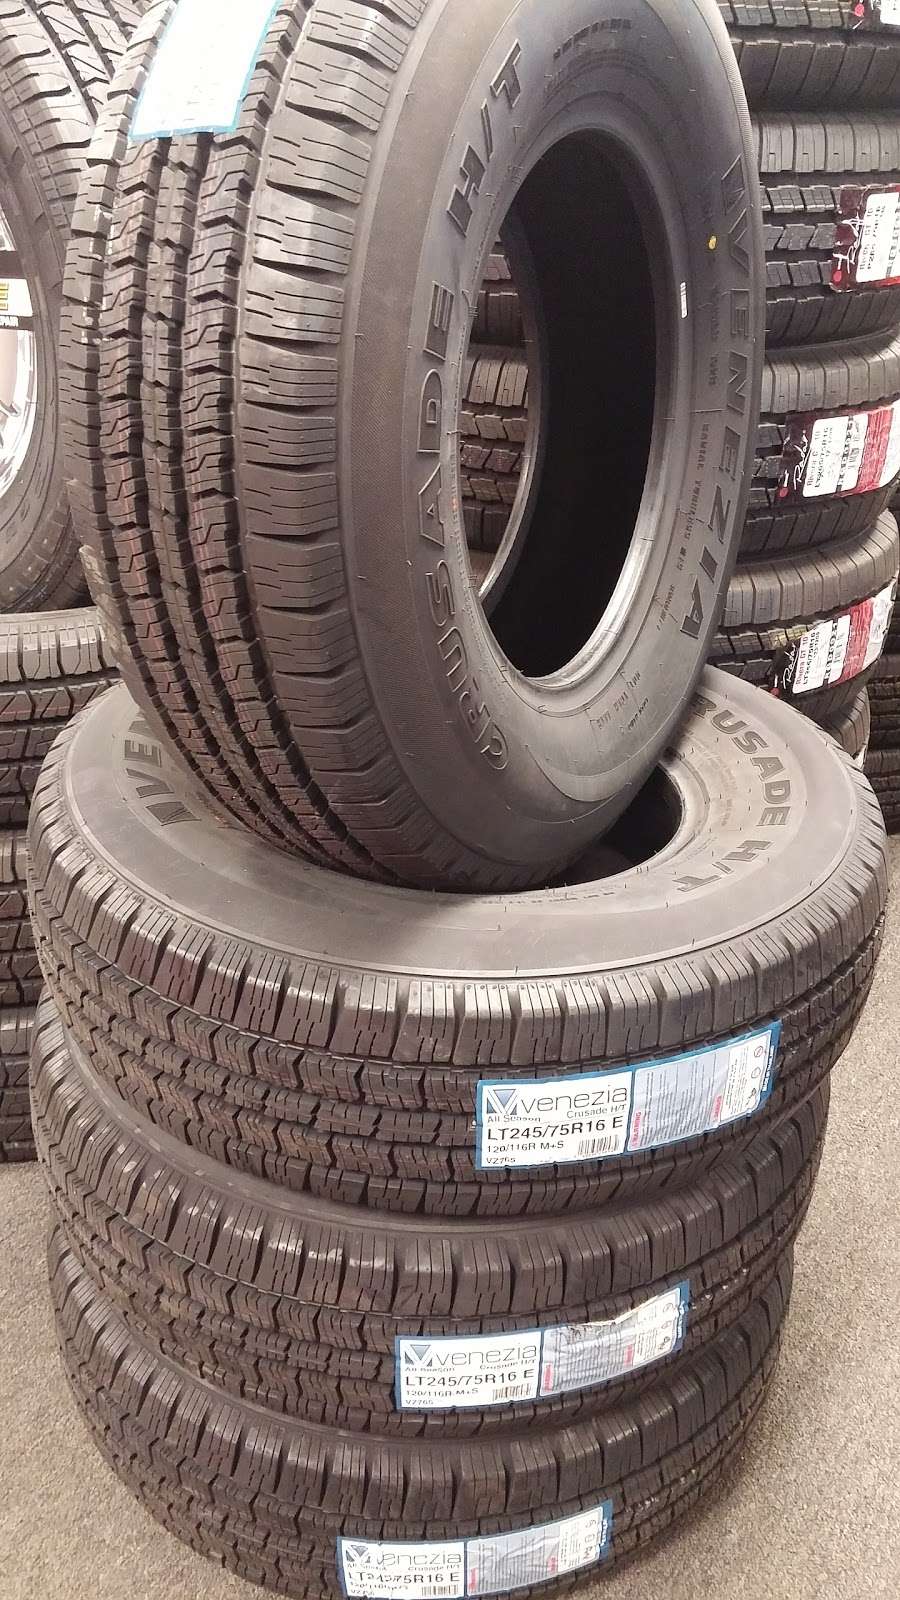 Tire & Auto Superstore | 5200 Cleveland St, Merrillville, IN 46410 | Phone: (219) 887-3333